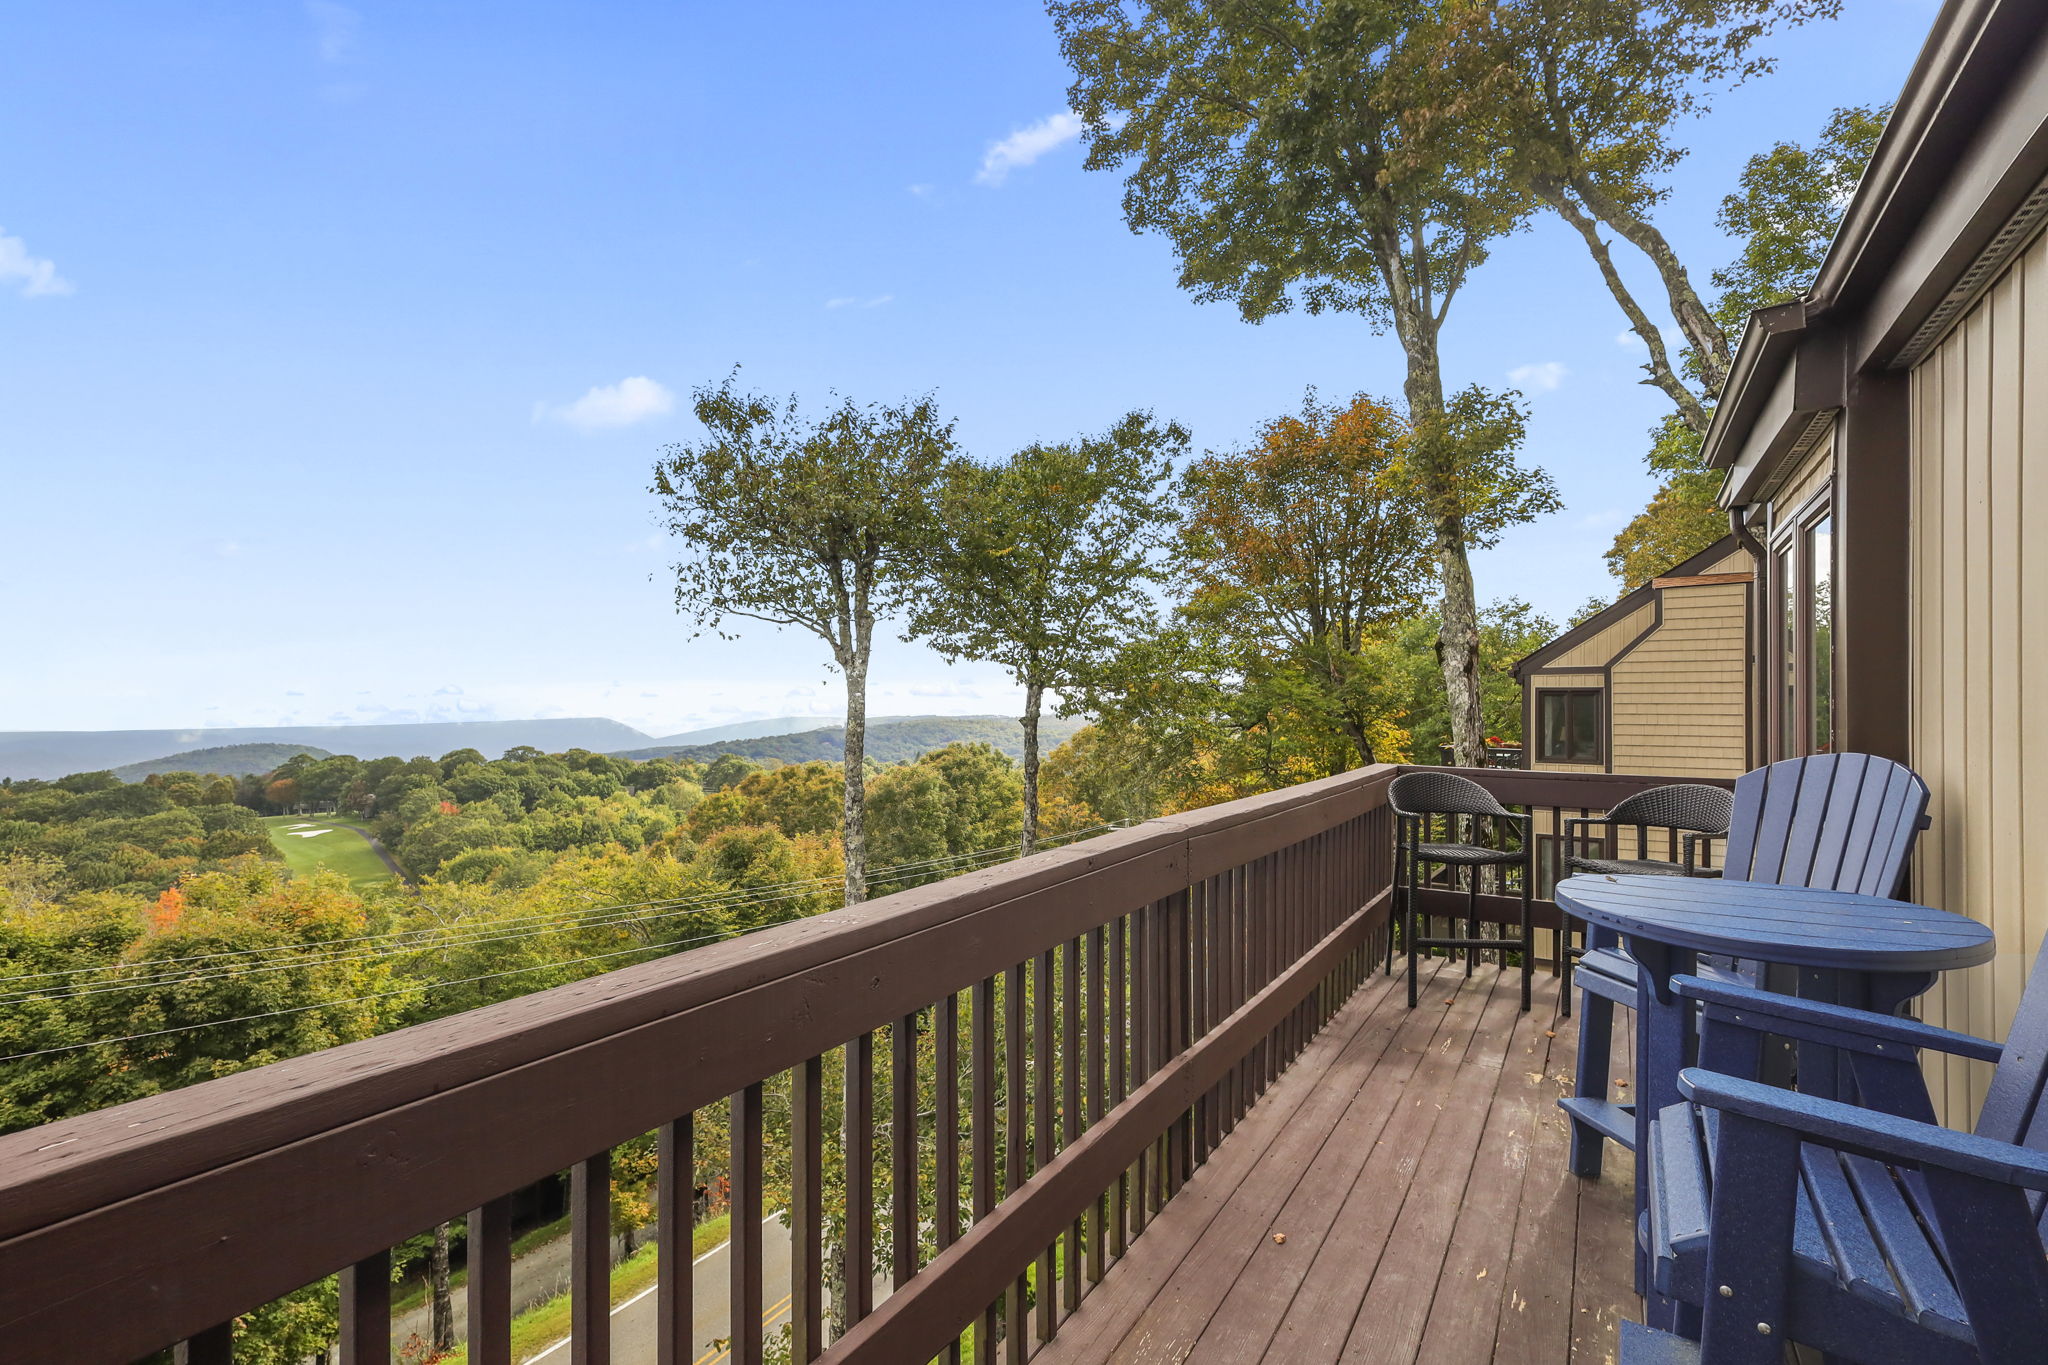 The deck provides an expansive outdoor experience with awe-inspiring views!